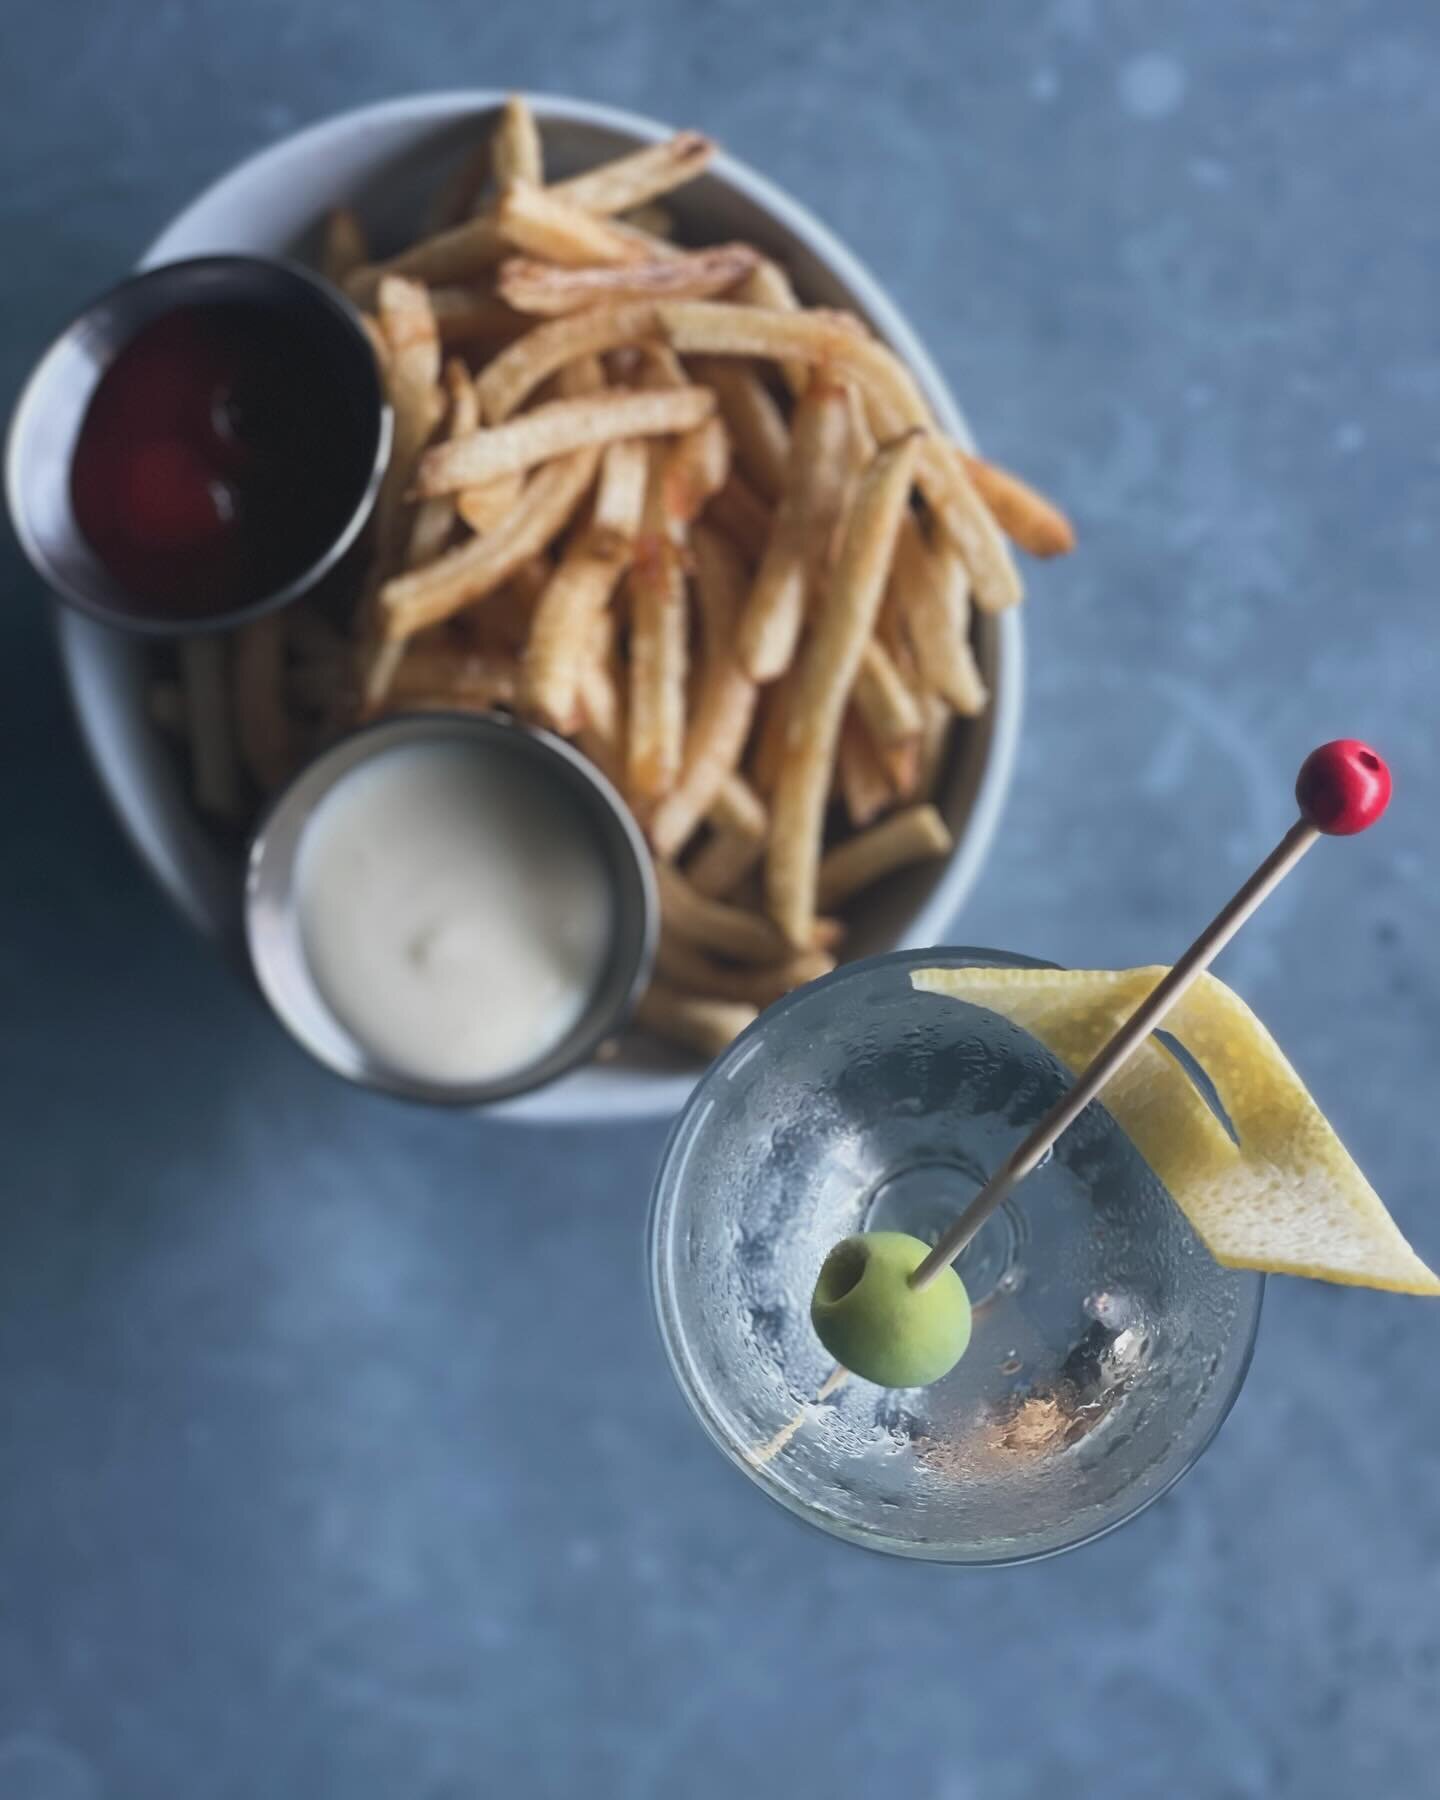 An ice cold martini and hot &amp; crispy fries &mdash; is there a happier &lsquo;happy meal&rsquo; out there? Martini Monday is here and perfectly primed to leave a big &lsquo;ol smile on your face.  Join us each and every Monday night to celebrate t